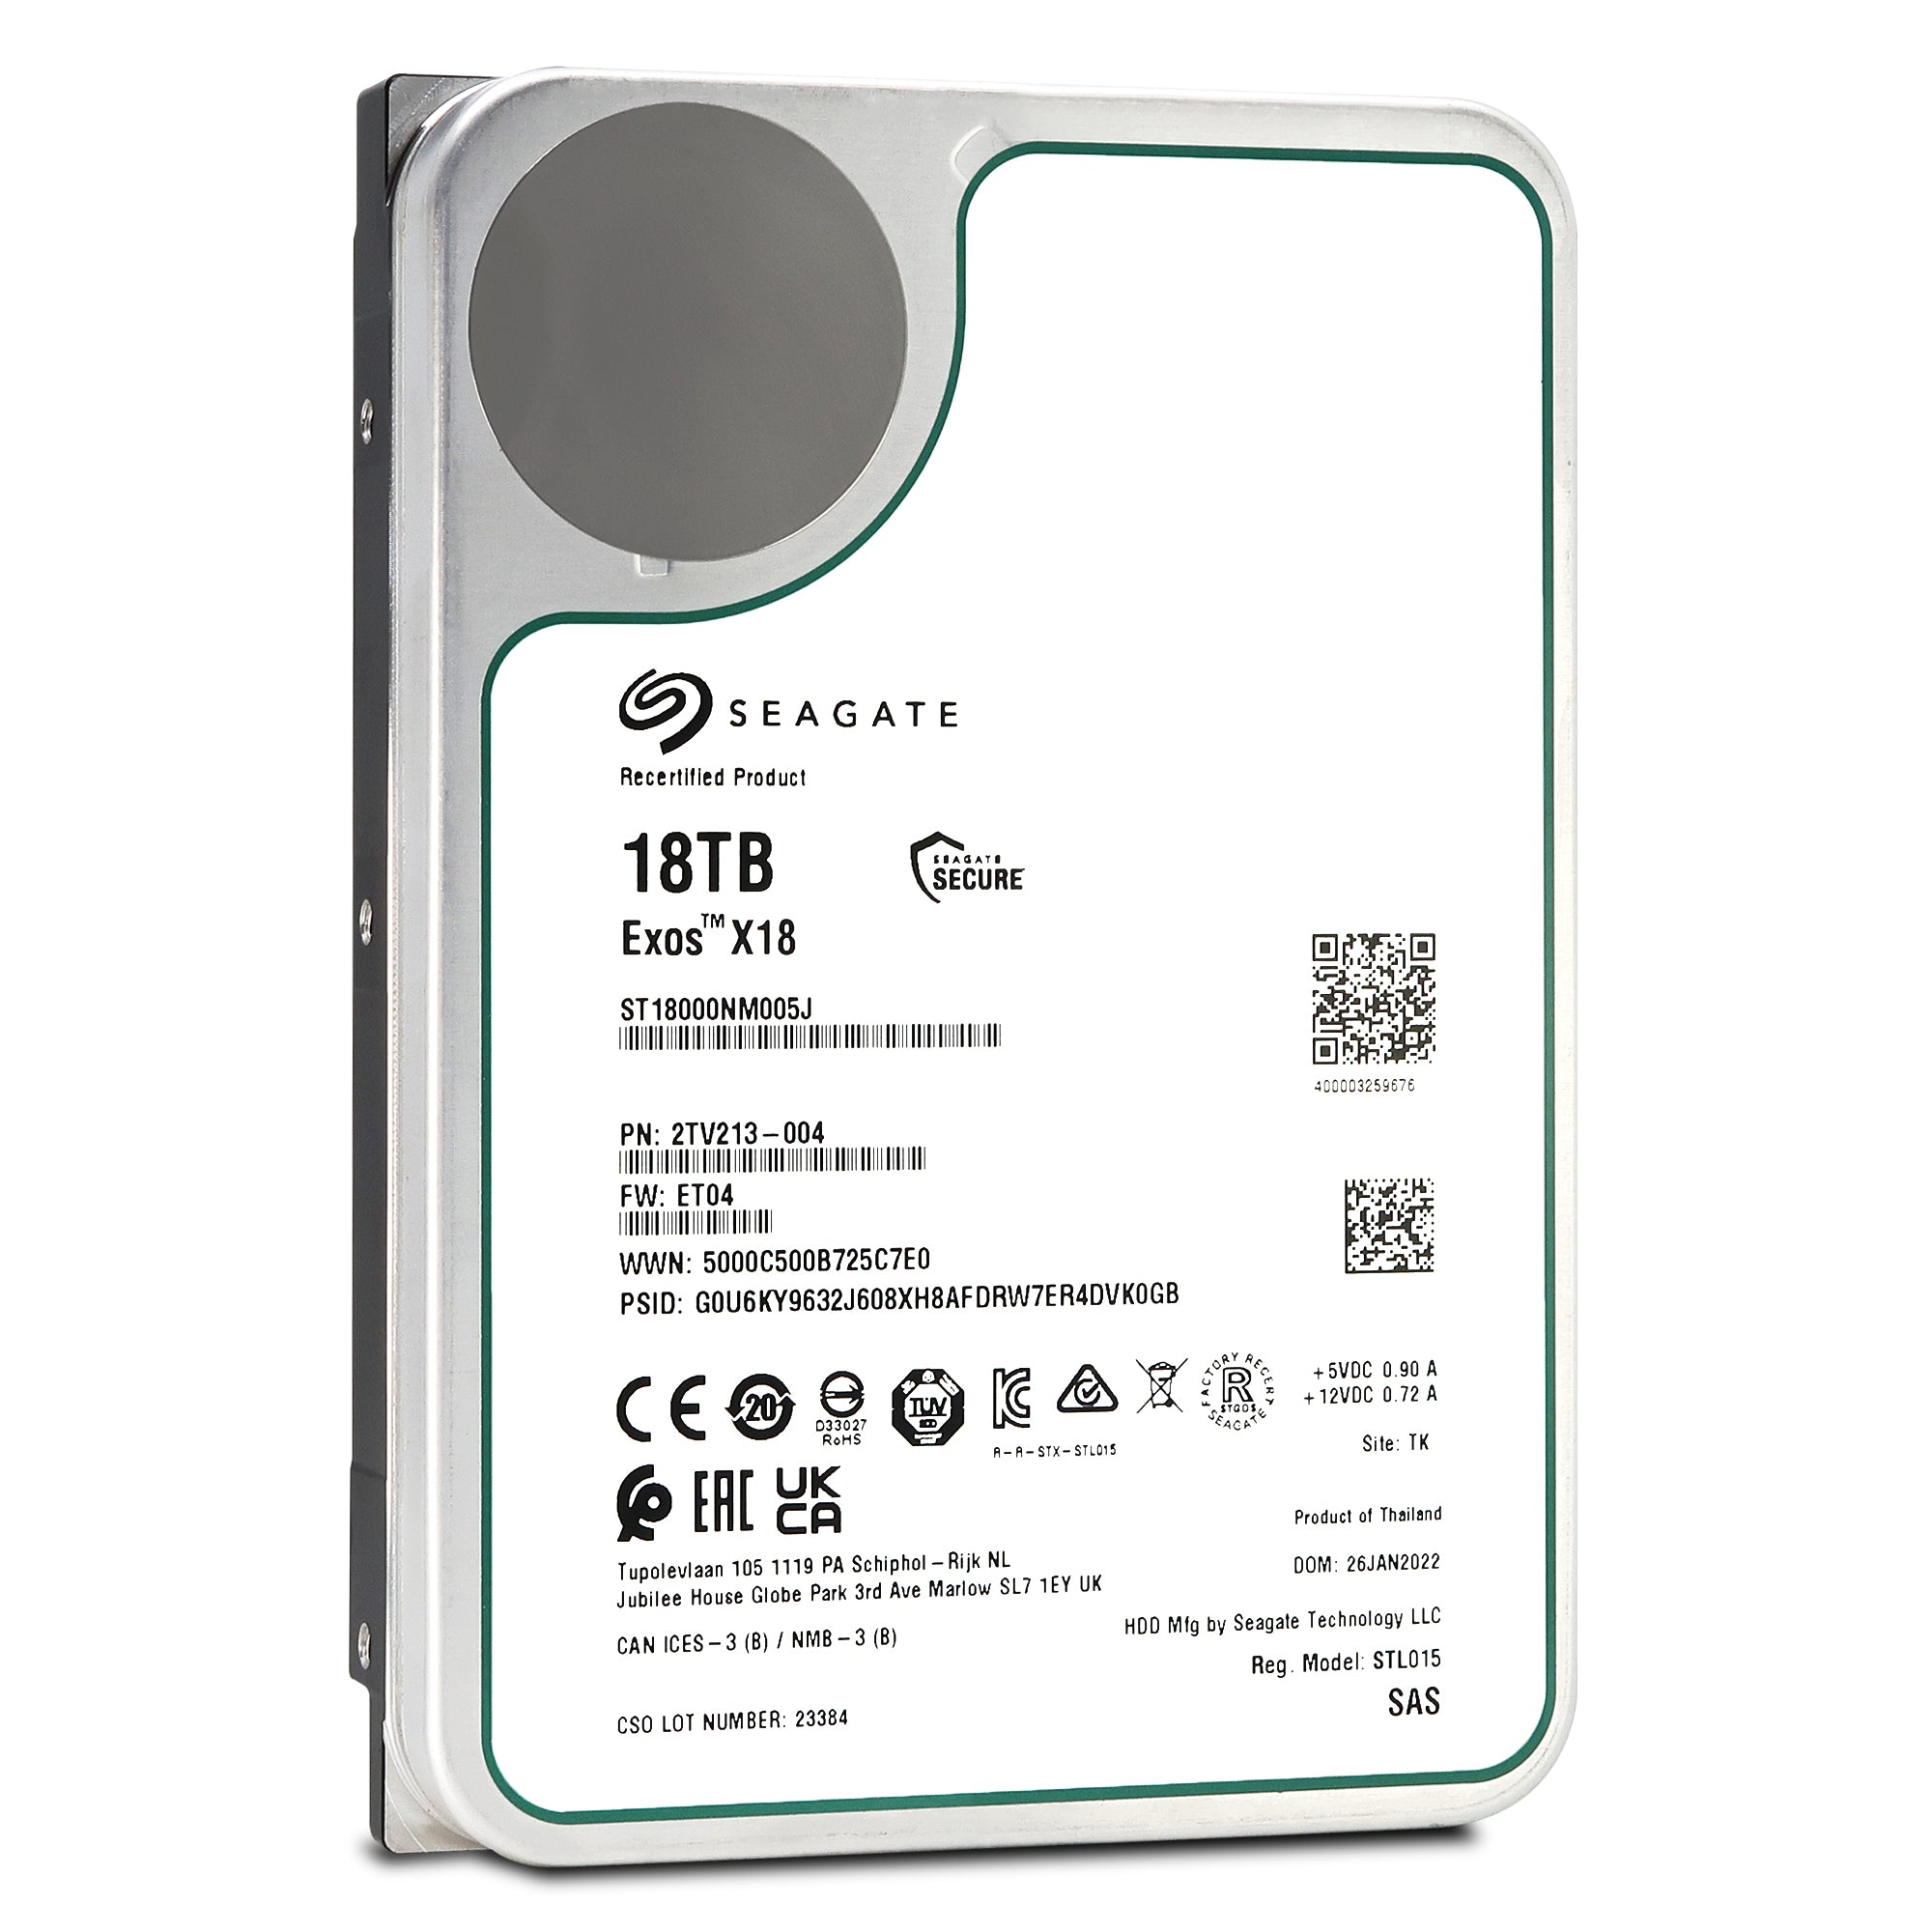 Seagate Exos X18 ST18000NM005J 18TB 7.2K RPM SAS 12Gb/s 512e SED 3.5in Recertified Hard Drive - Front View